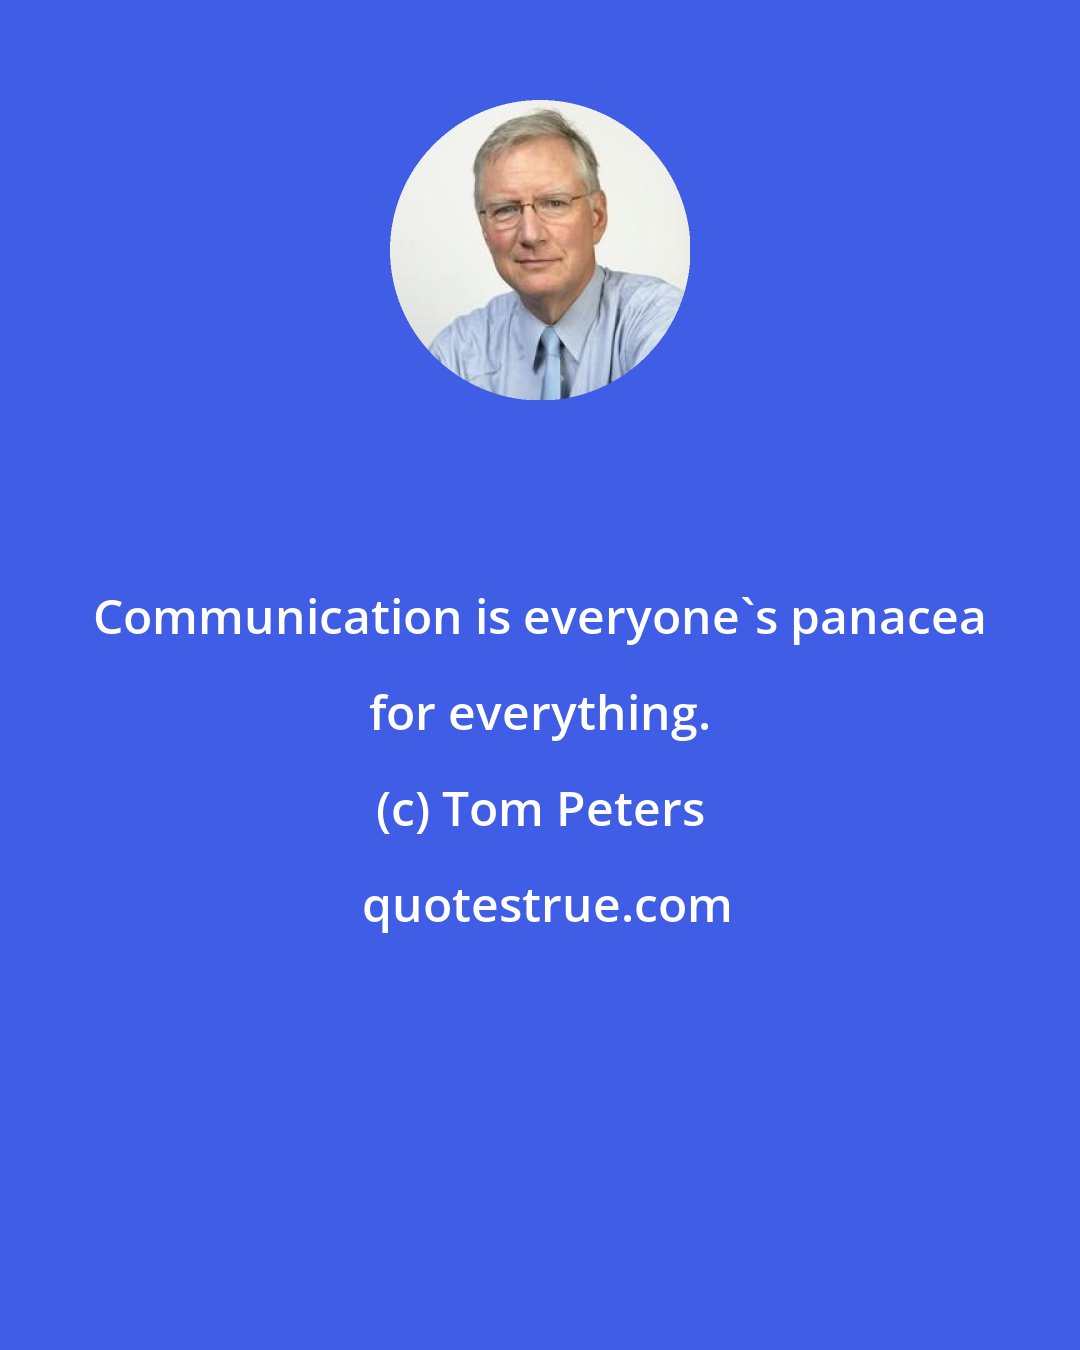 Tom Peters: Communication is everyone's panacea for everything.